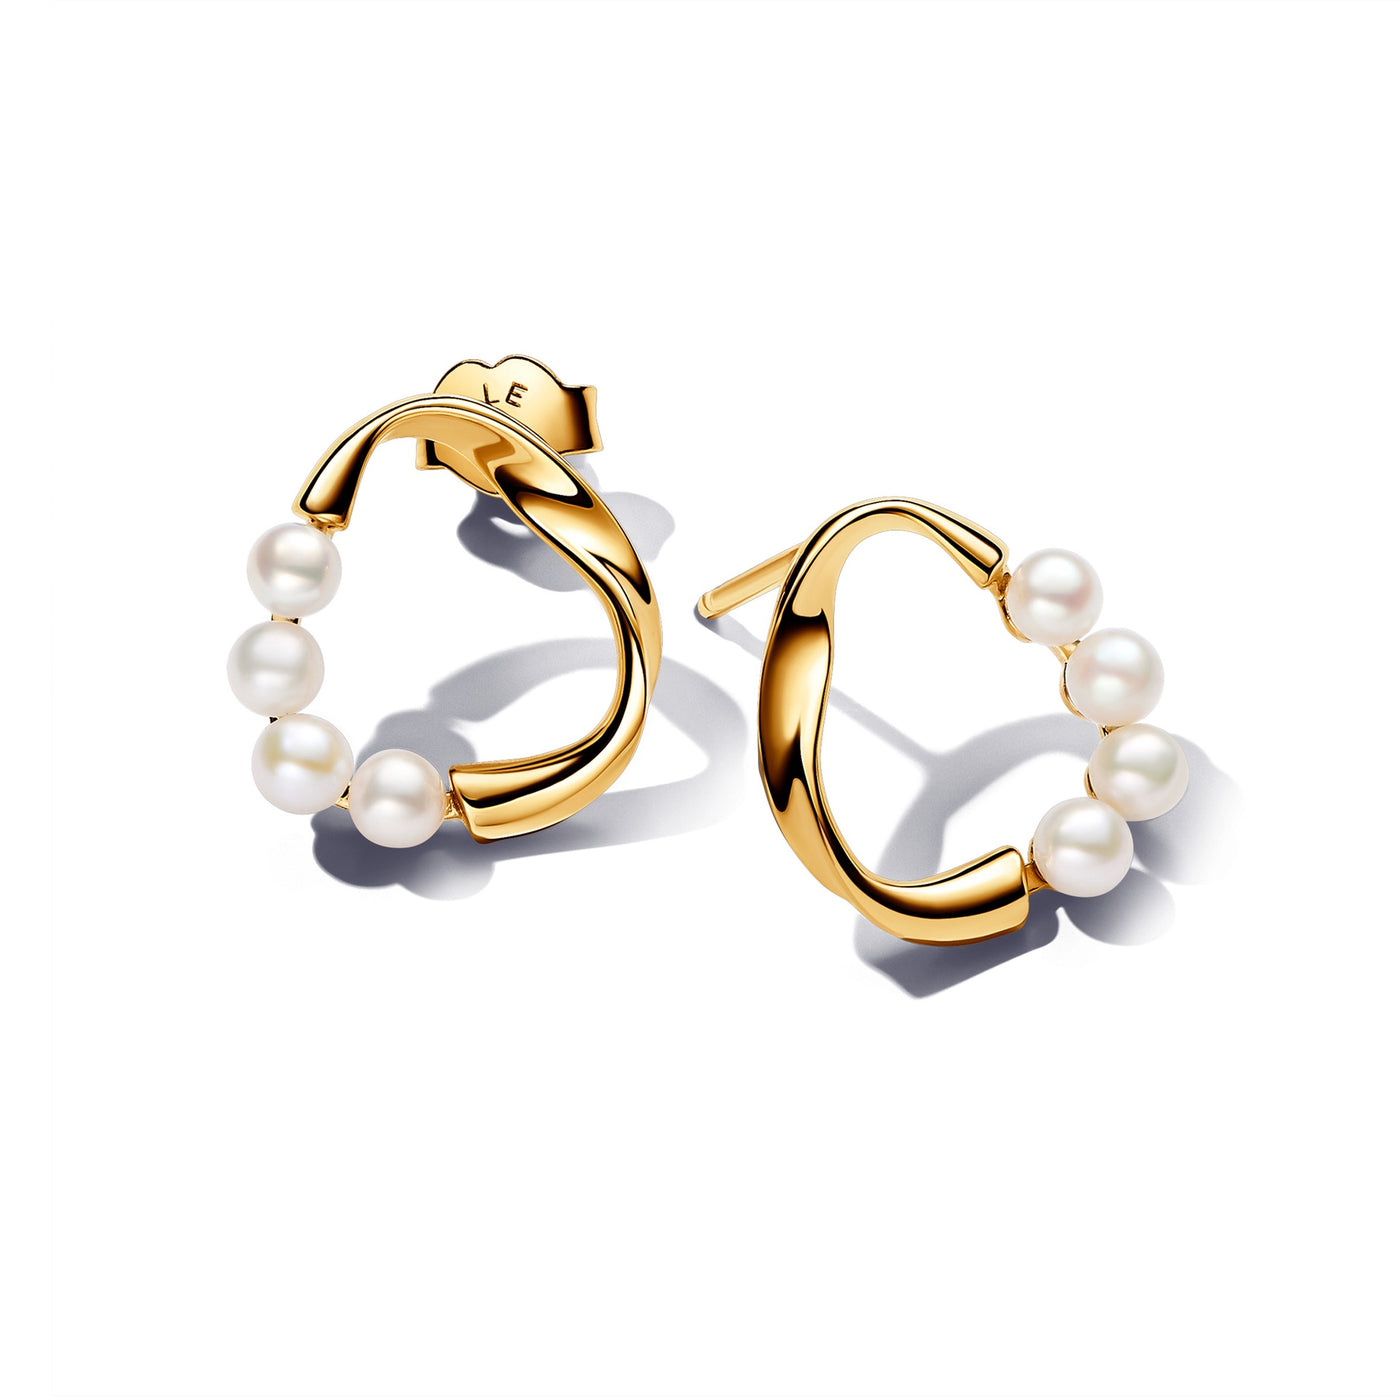 Pandora Organically Shaped Circle & Treated Freshwater Cultured Pearls Stud Earrings